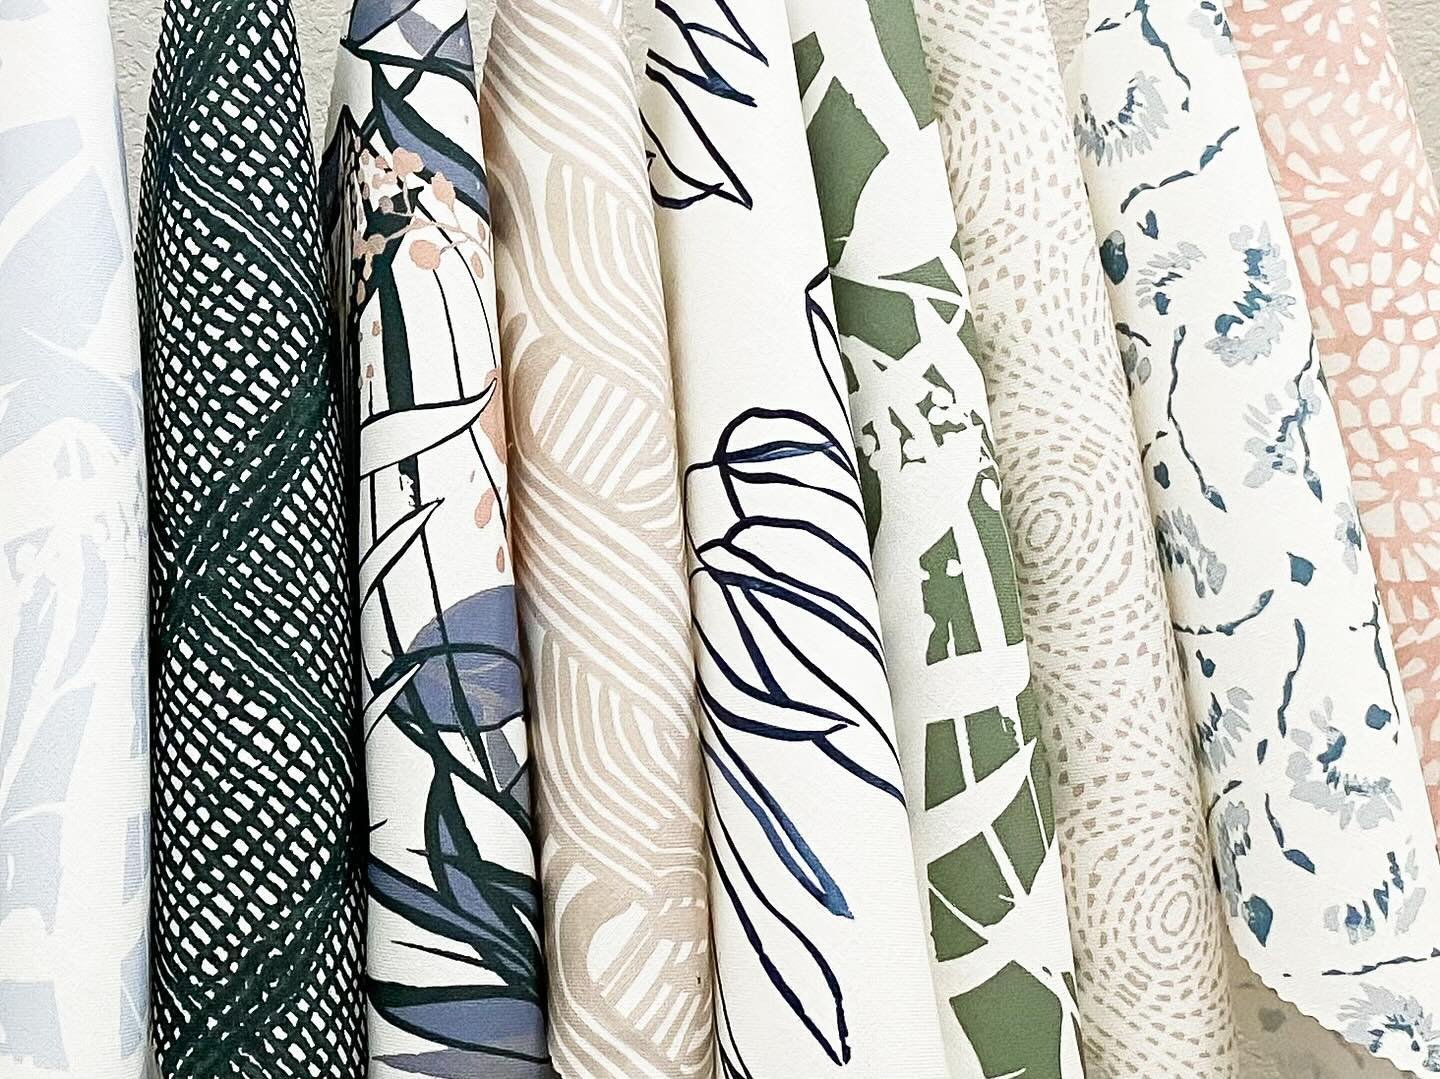 If you&rsquo;re an interior designer or in the trade, we&rsquo;re here for you! 

Head over to our website to register for a trade account and request swatches. 
.
.
.
.
.
#boutiquetextiles #linentextiles #tothetrade #interiordesignfabric #designerfa